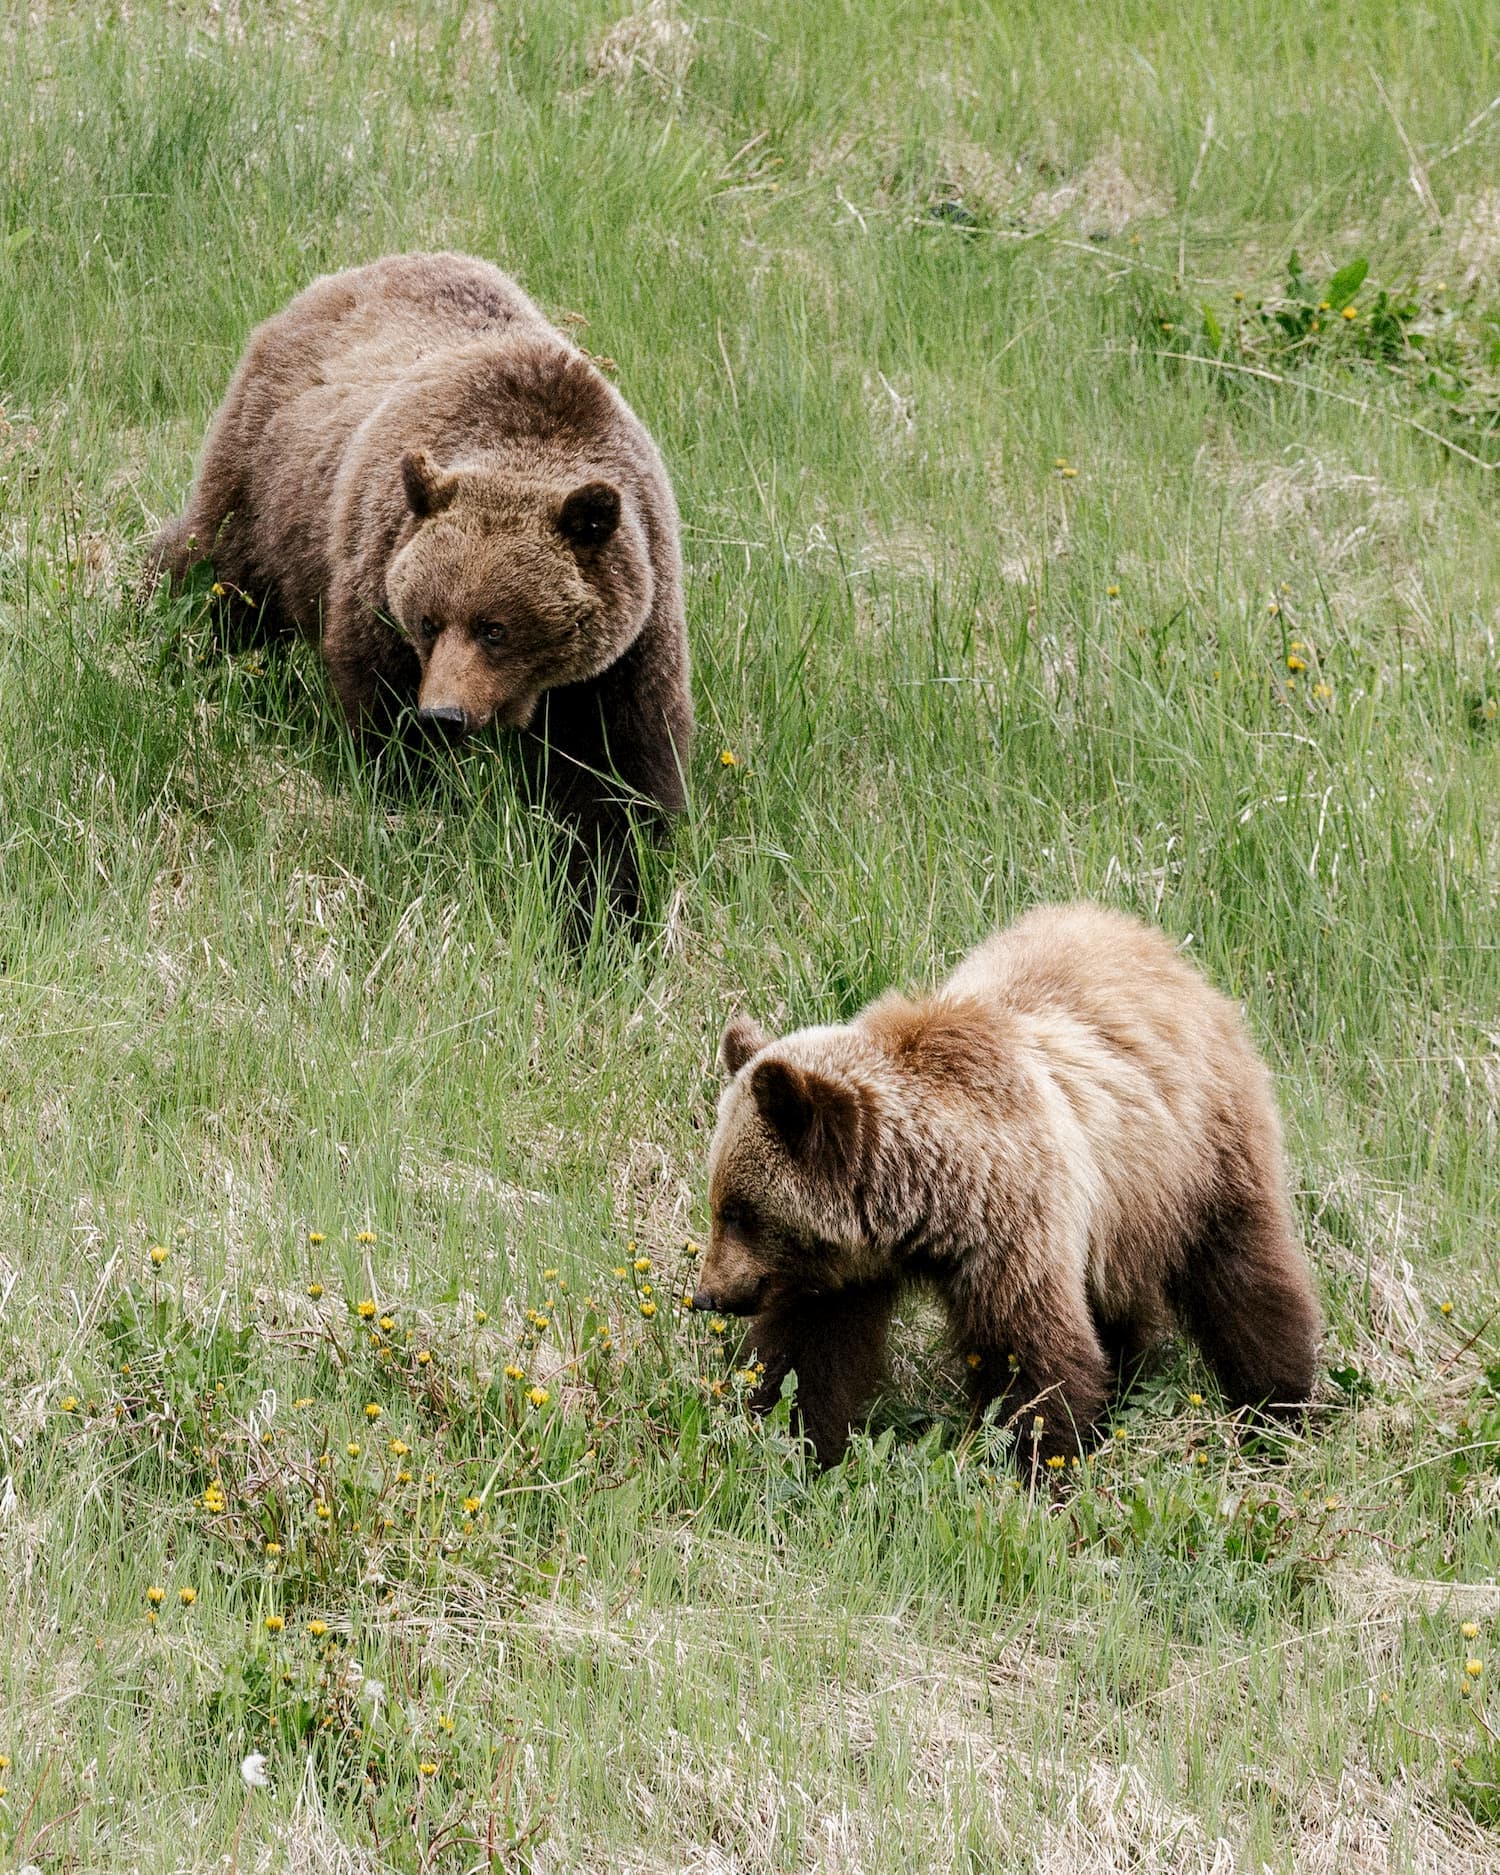 Up close and personal with some bears (we were actually far away with a zoom lens!)